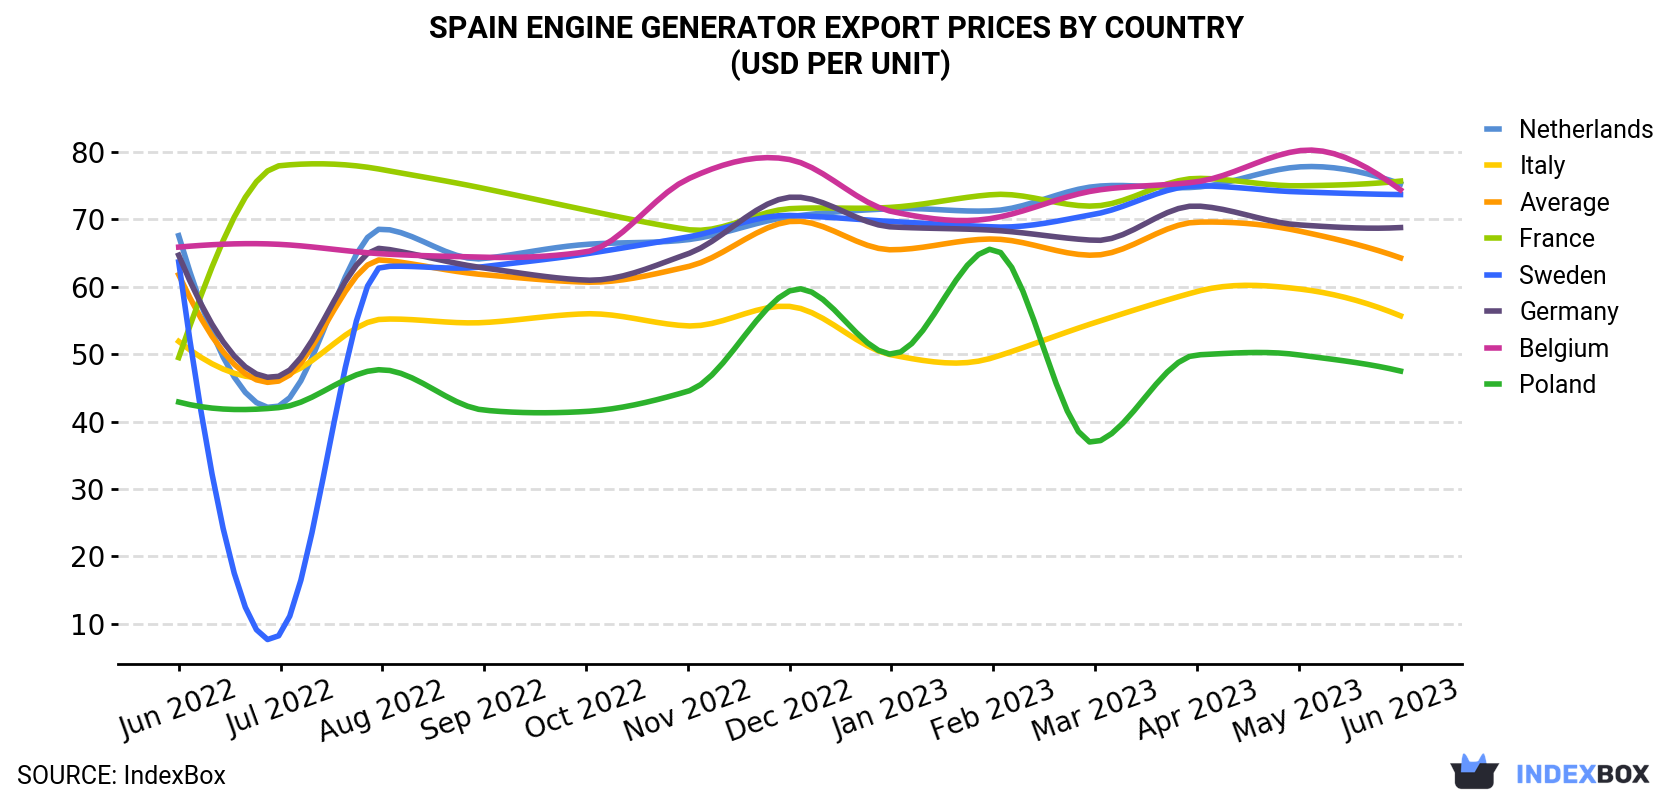 Spain Engine Generator Export Prices By Country (USD Per Unit)